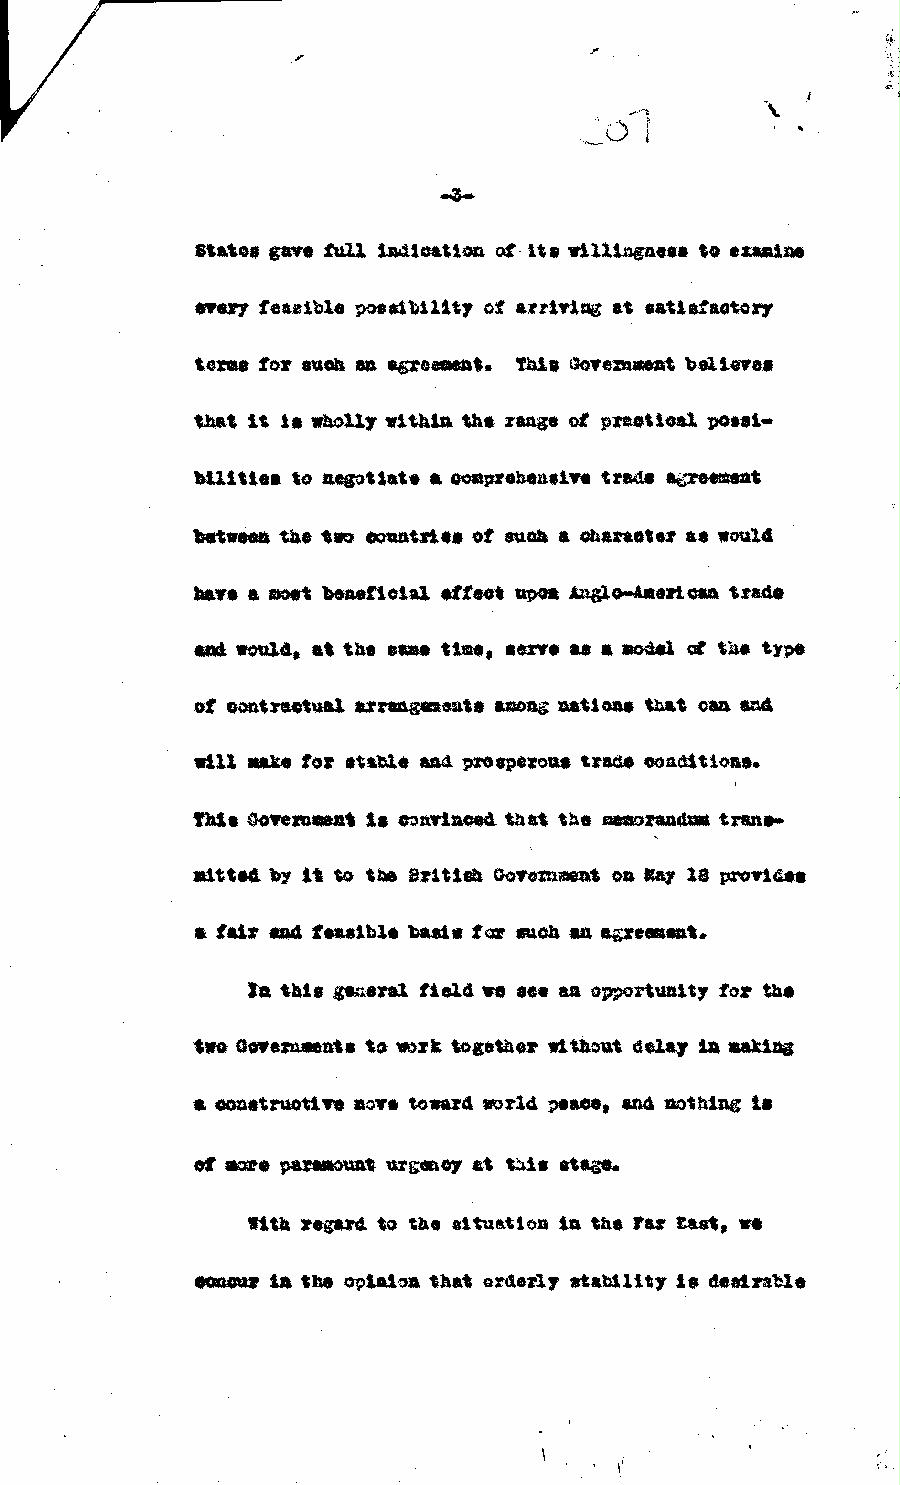 [a303c07.jpg] - Cont-memo from Dept. of State5/28/37